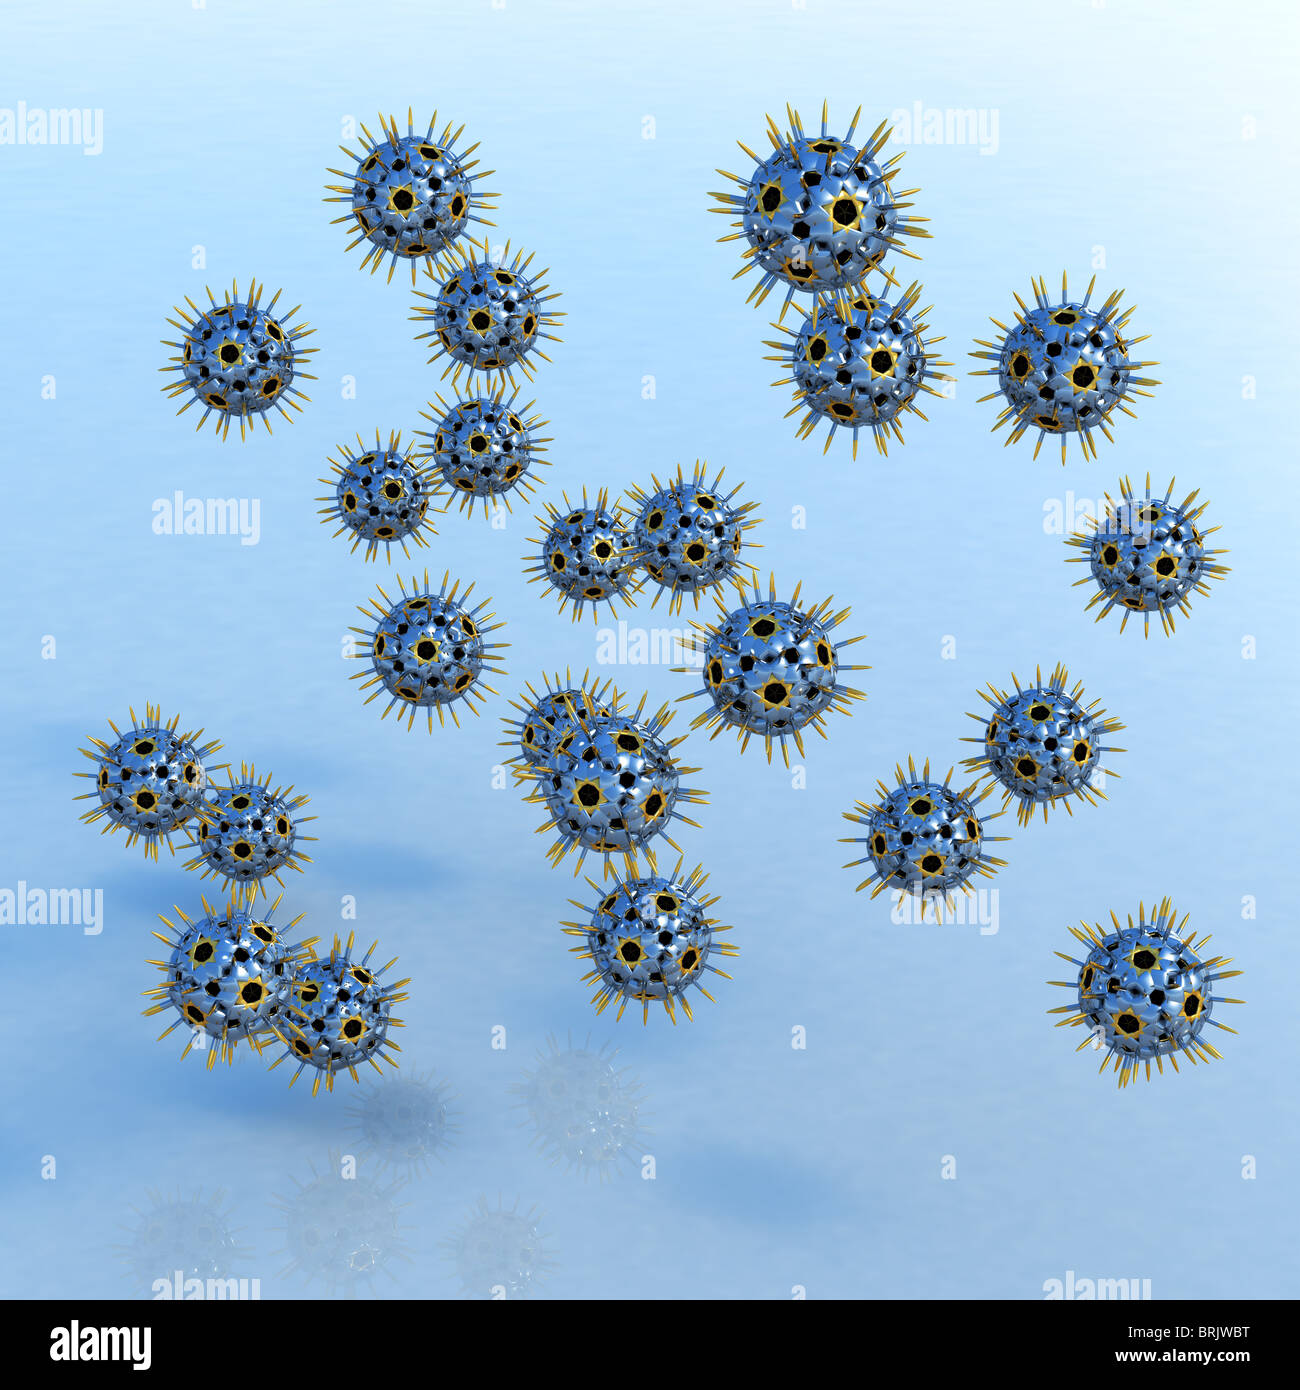 Metallic, shiny objects hovering over a blue, mildly reflecting surface, resembling viruses made from chrome with golden spikes. Stock Photo